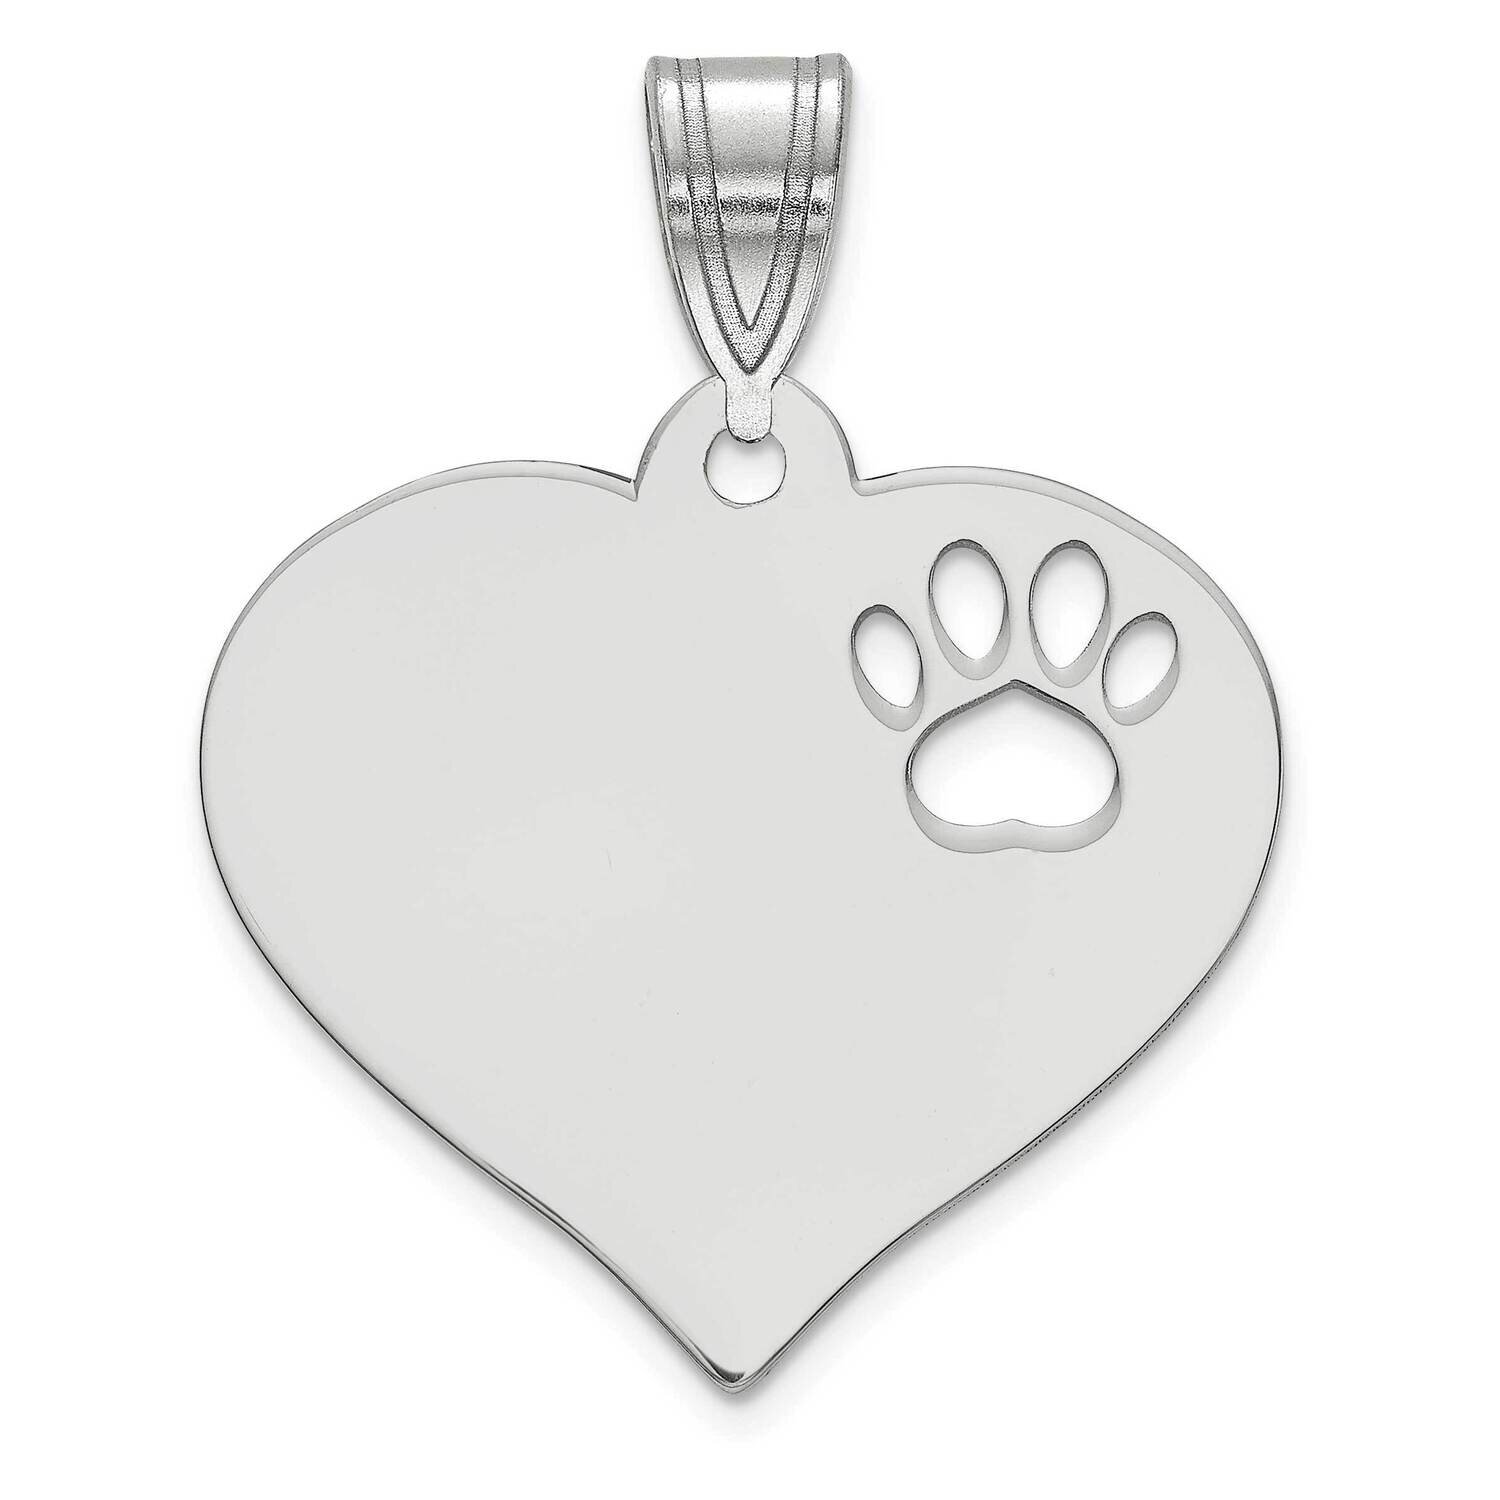 Heart Pendant with Pawprint Cutout Sterling Silver Rhodium-plated XNA767SS